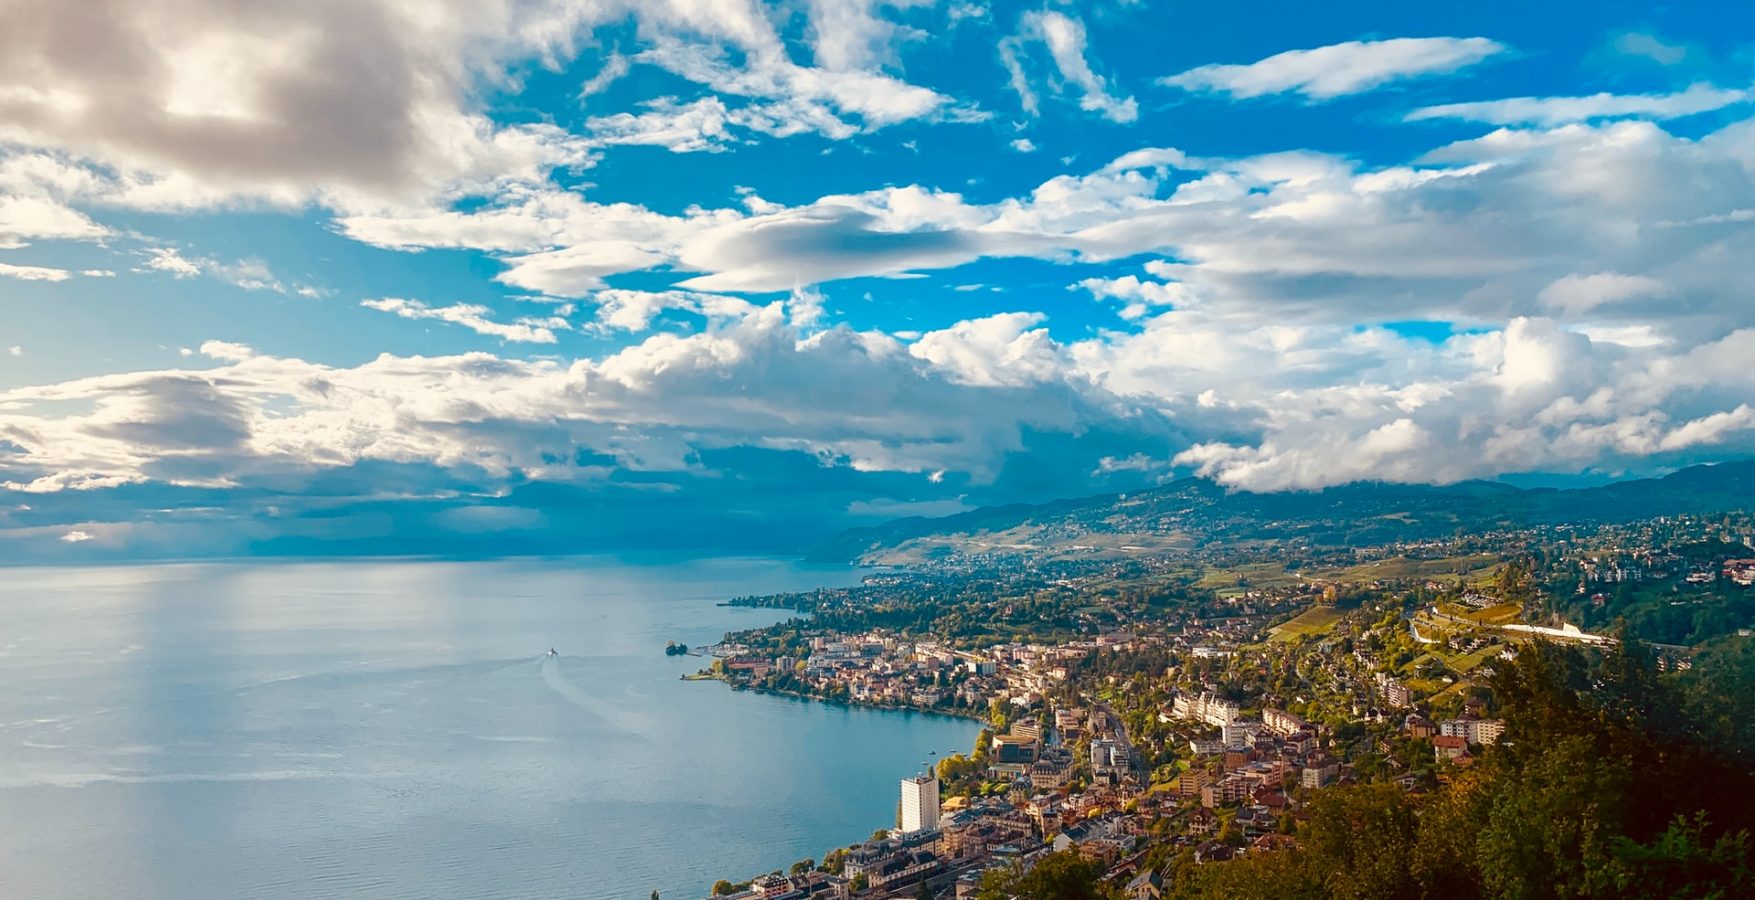 Small Town, Big Dreams: Student Life in Montreux - Studying in Switzerland